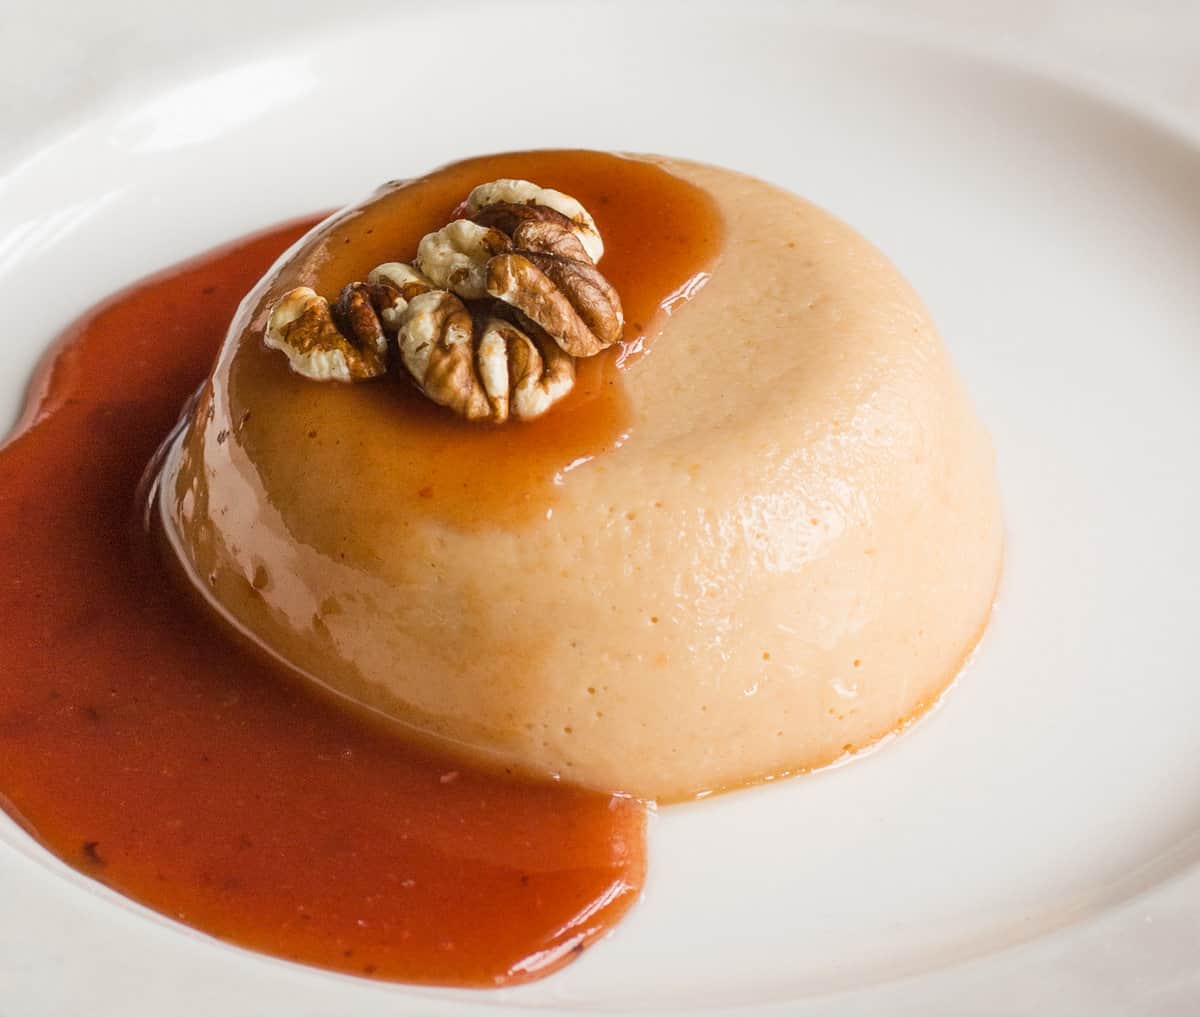 Paw Paw Panna Cotta Recipe with Wild Plum Sauce and hickory nuts